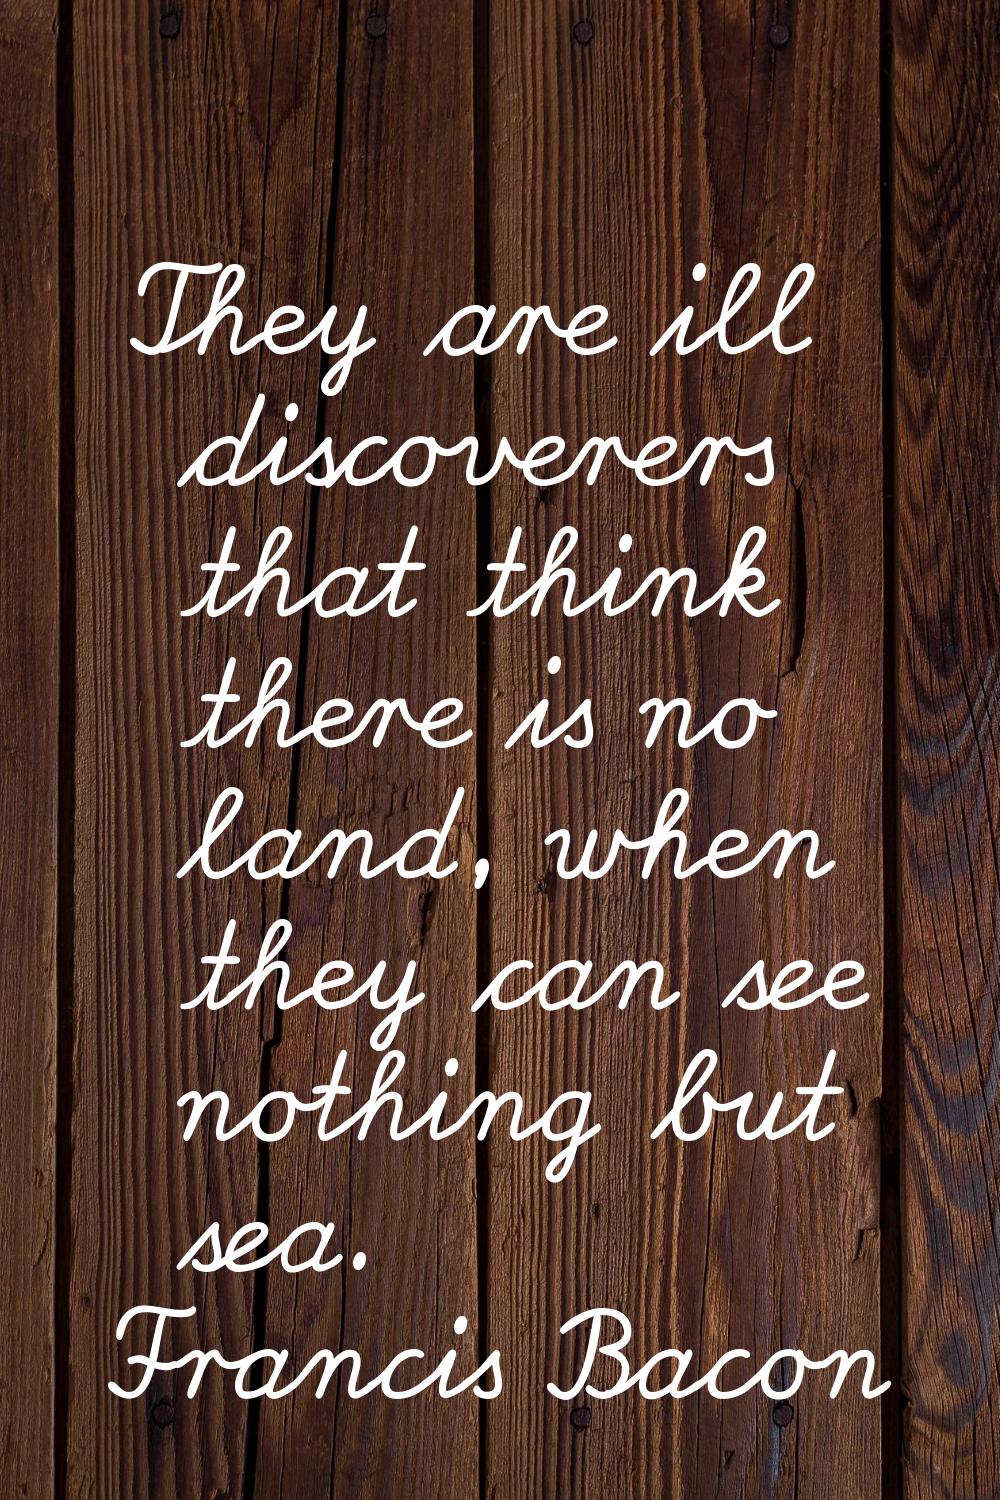 They are ill discoverers that think there is no land, when they can see nothing but sea.